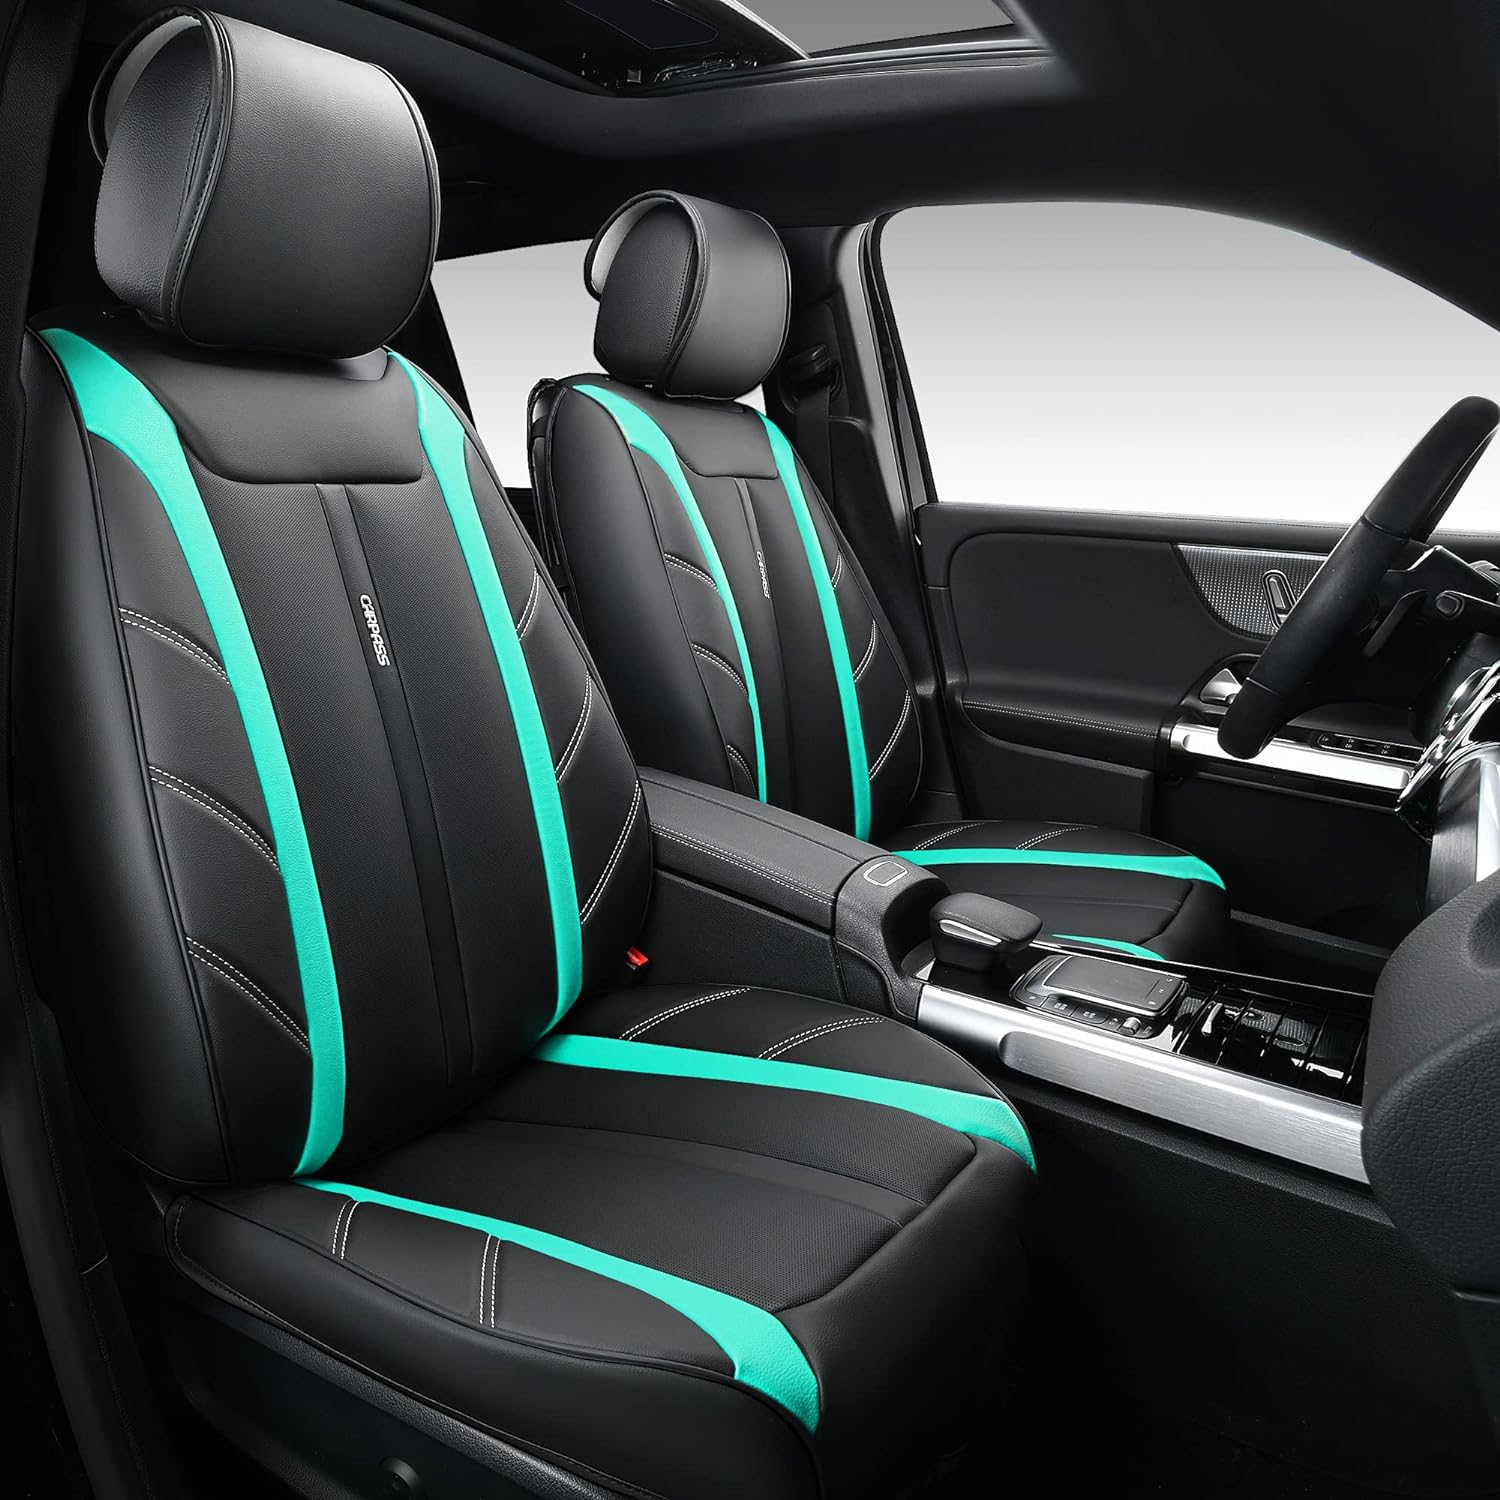 CAR PASS Leather Seat Cover Full Set Luxury Sporty Cushioned. Universal Waterproof Lychee Leatherette Car Seat Covers Fit for Most Sedans,SUV,Truck,Automotive Black and Fluorescent Green